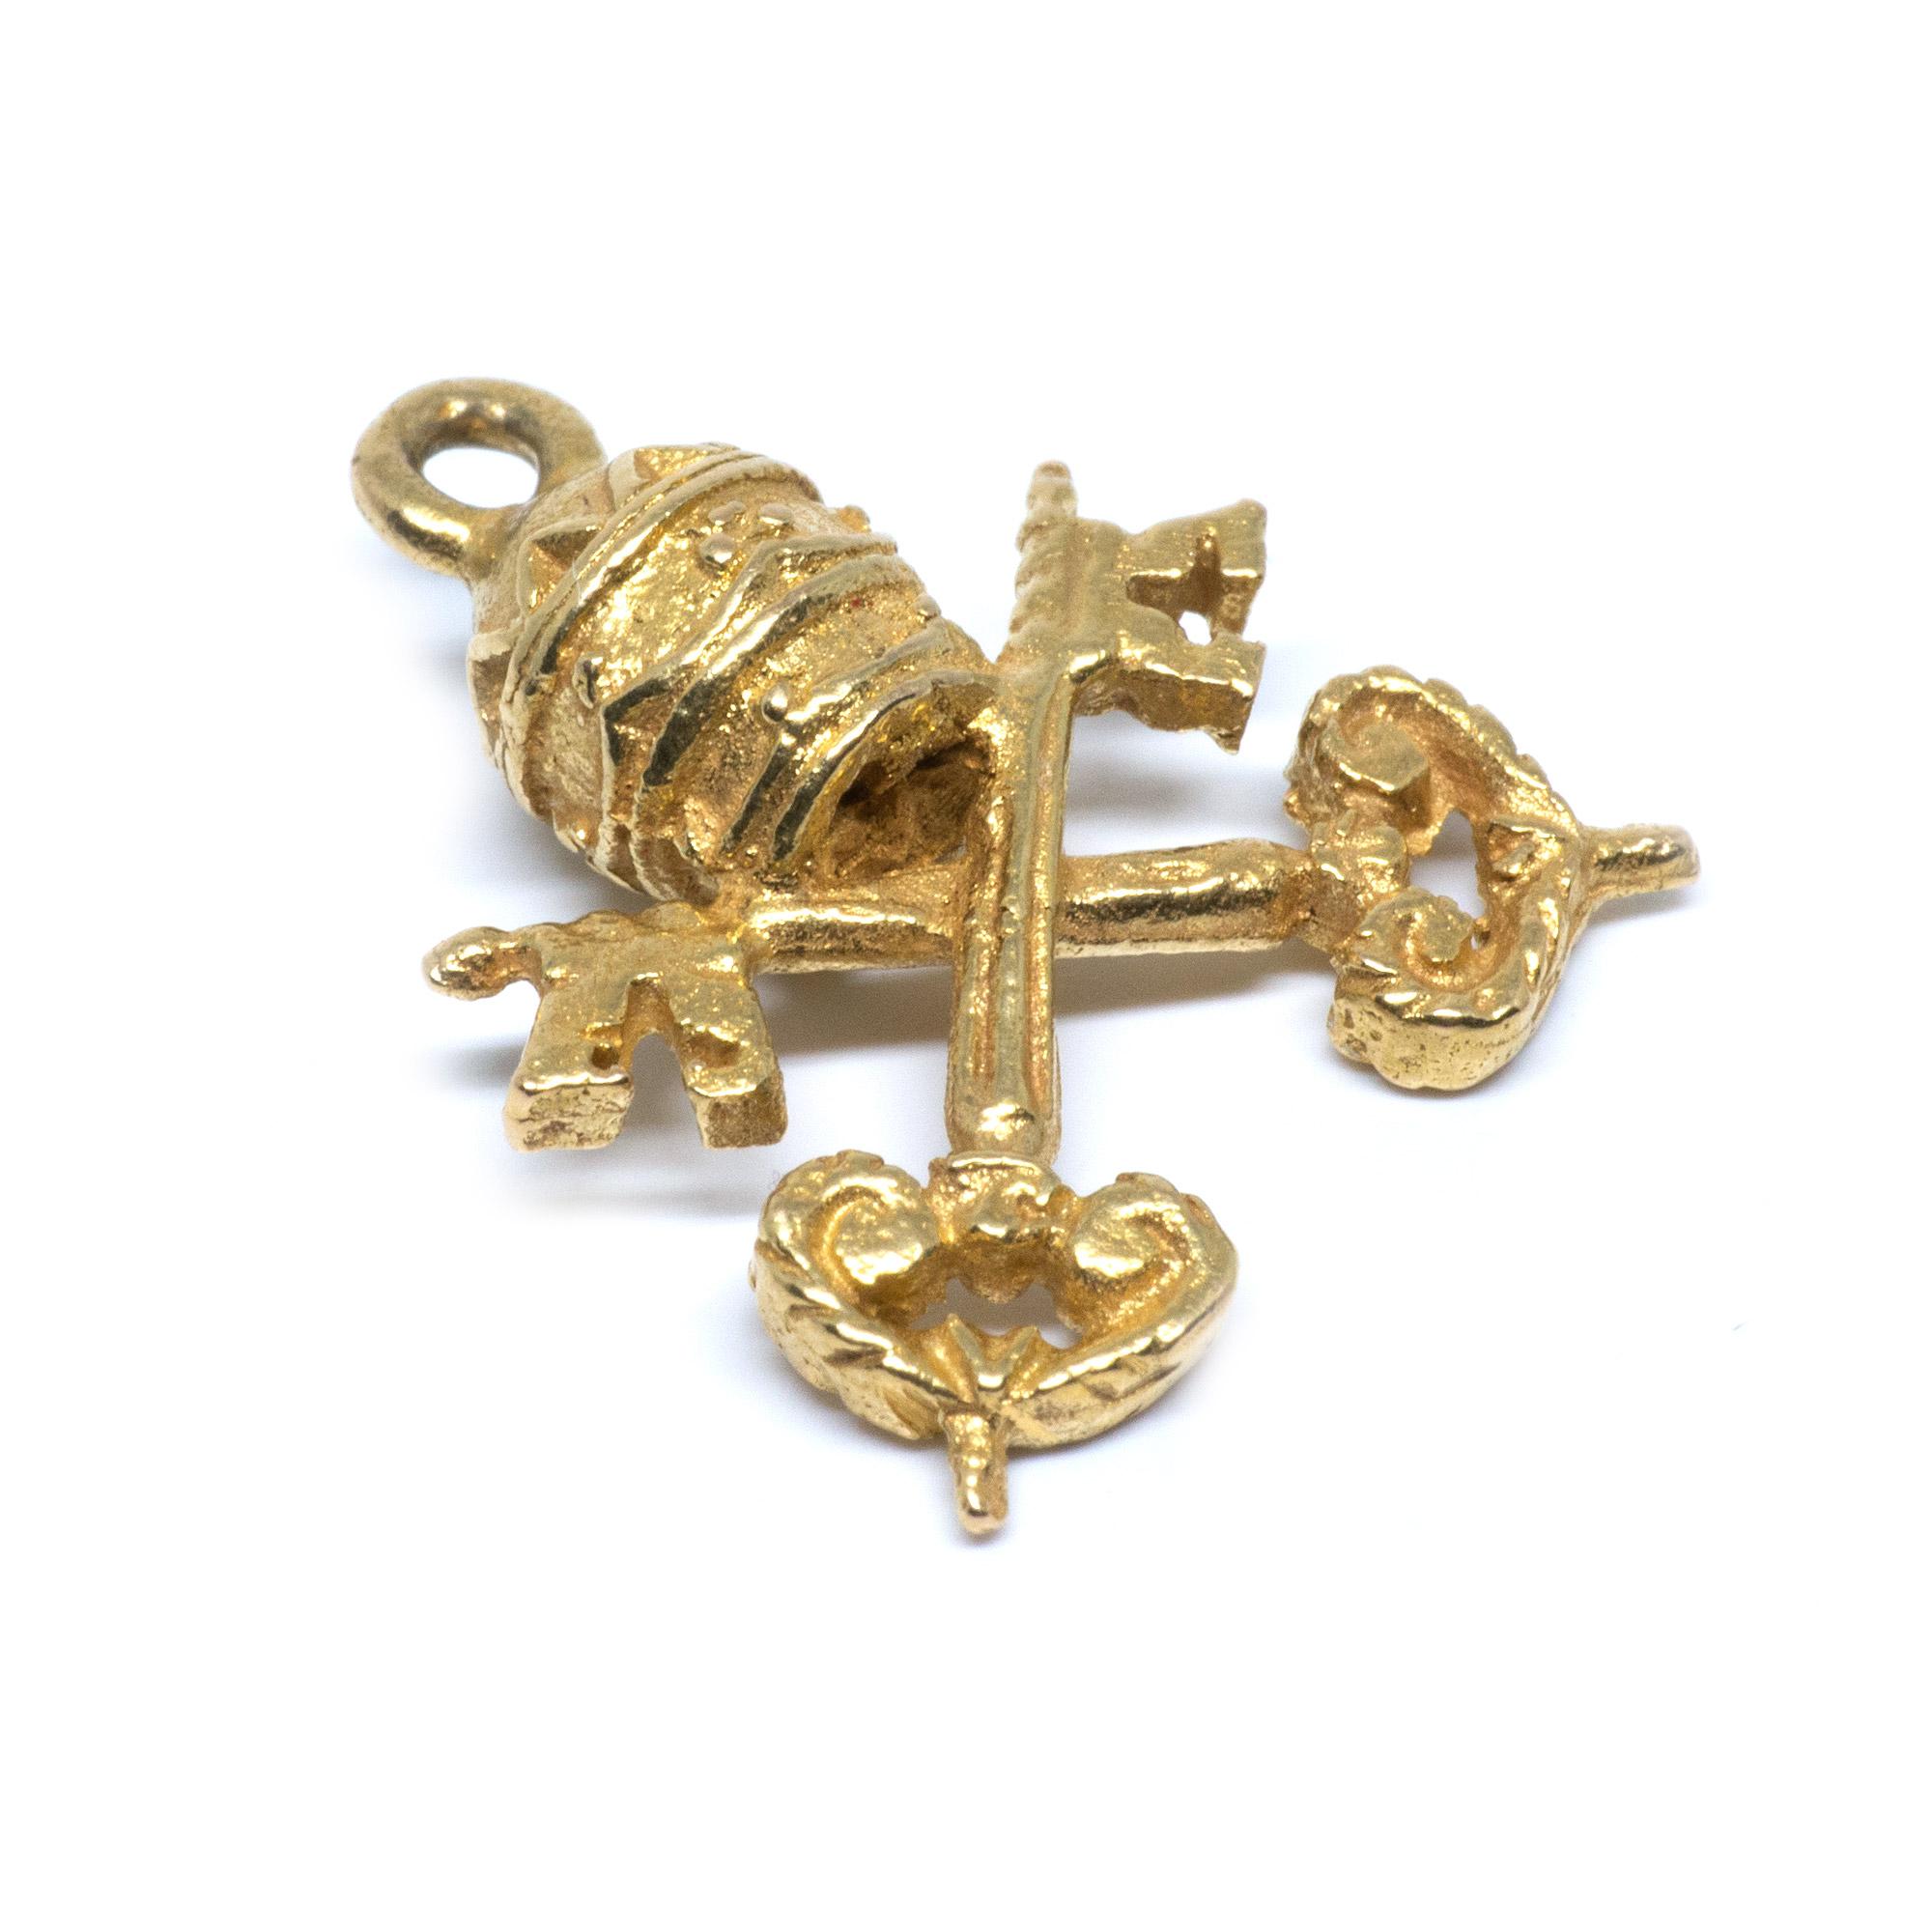 Rome, The Vatican this charm can re-affirm your faith or relive a trip to the holy city. 

Charm details:
Metal: 14 Karat Yellow Gold
Weight: 3.1 grams

Payment & Refund Details:
*More Pictures Available on Request*

Payment via